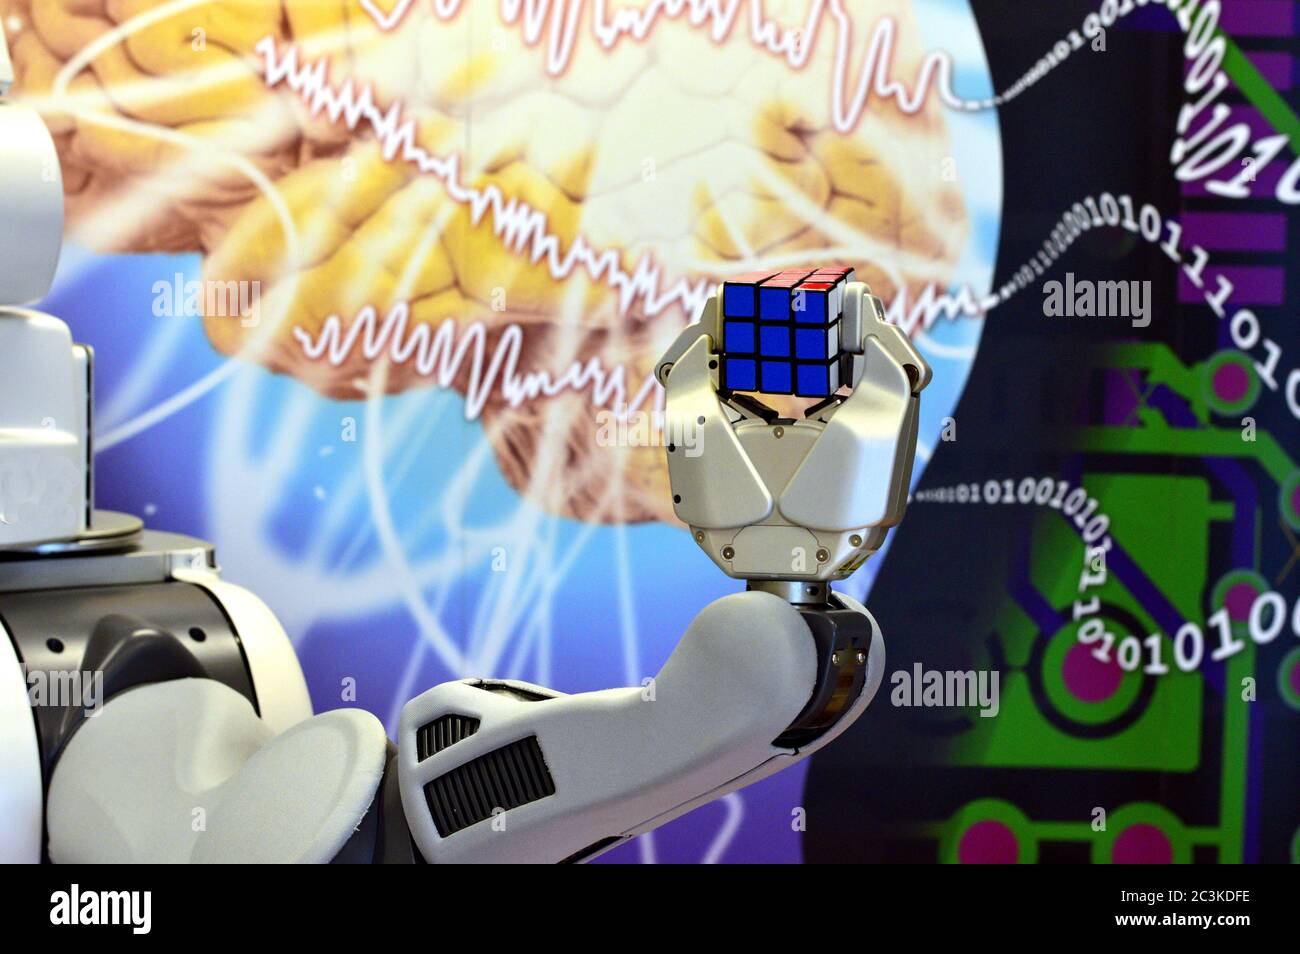 https://c8.alamy.com/comp/2C3KDFE/londonderry-uk-feb-2017-a-robot-hand-holding-a-rubiks-cube-with-a-background-of-brain-and-digital-numbers-2C3KDFE.jpg